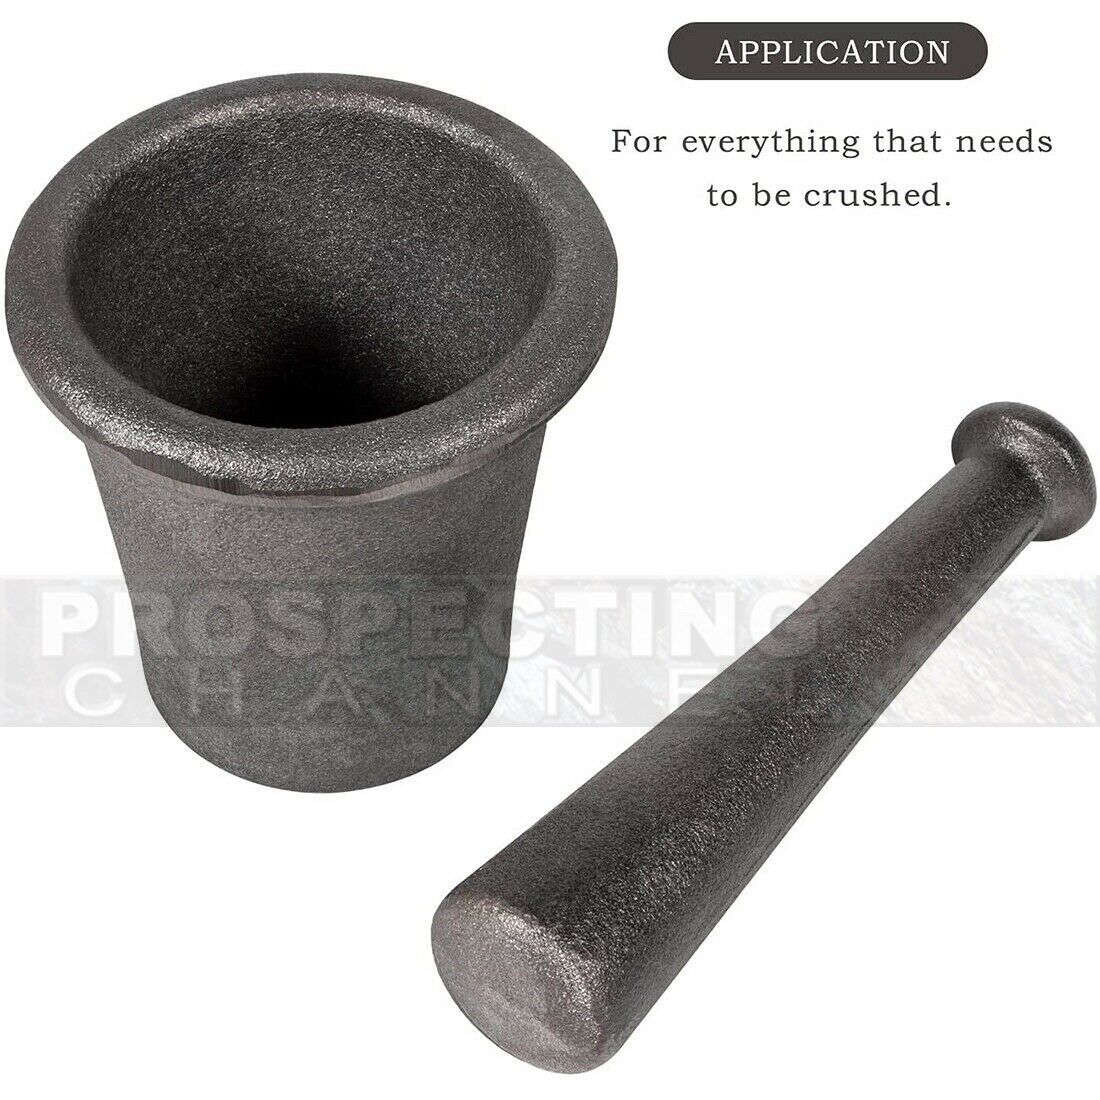 Mortar and Pestle Rock Crusher Large Made of Iron